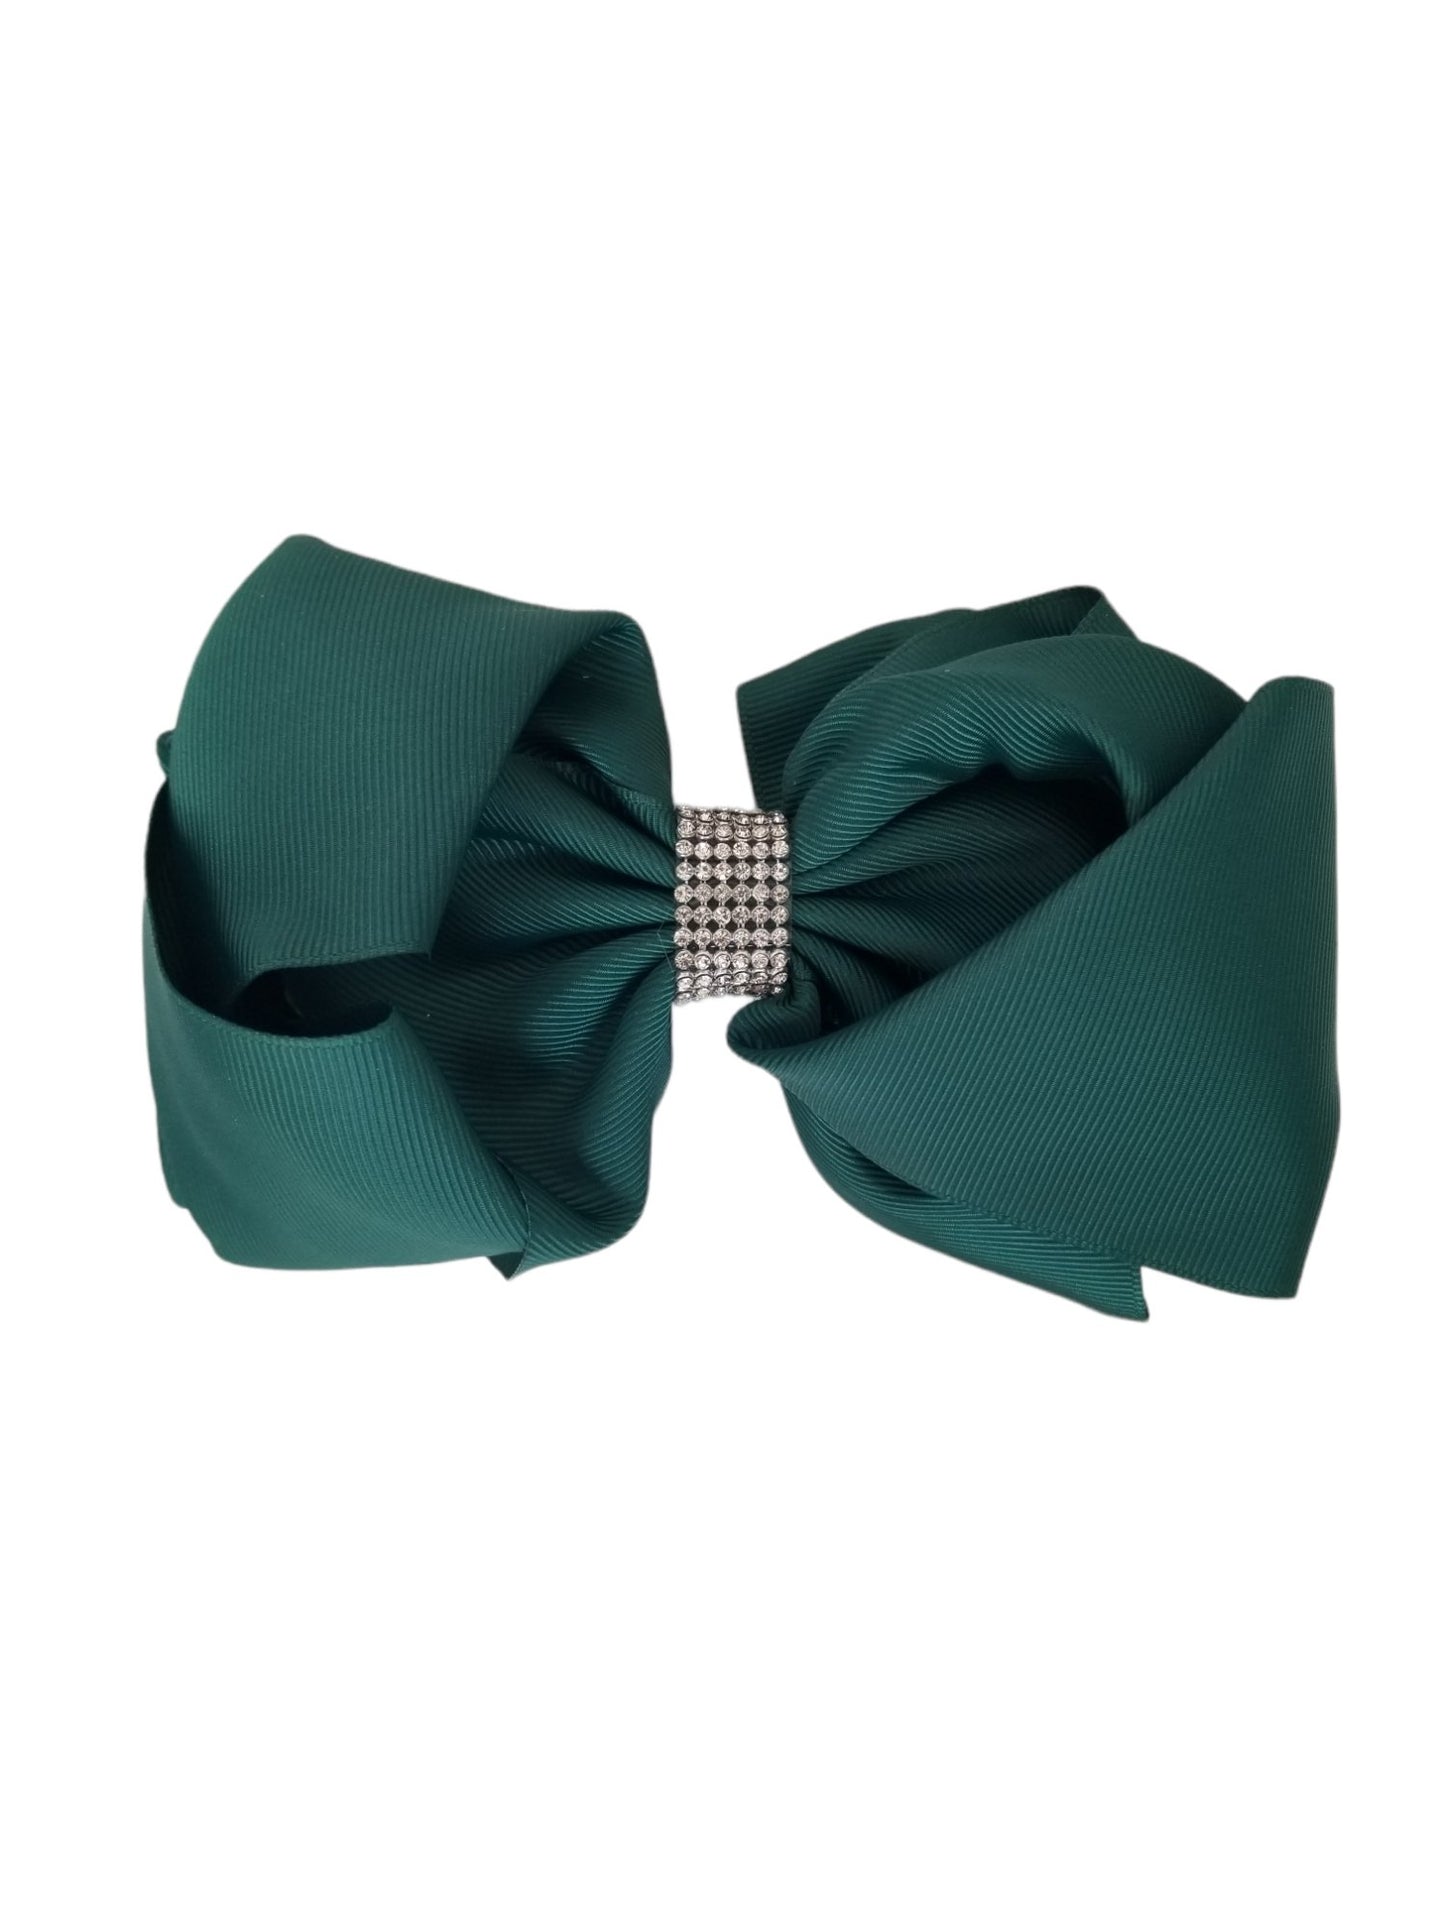 Large Emerald Green Hair Bow with Bling